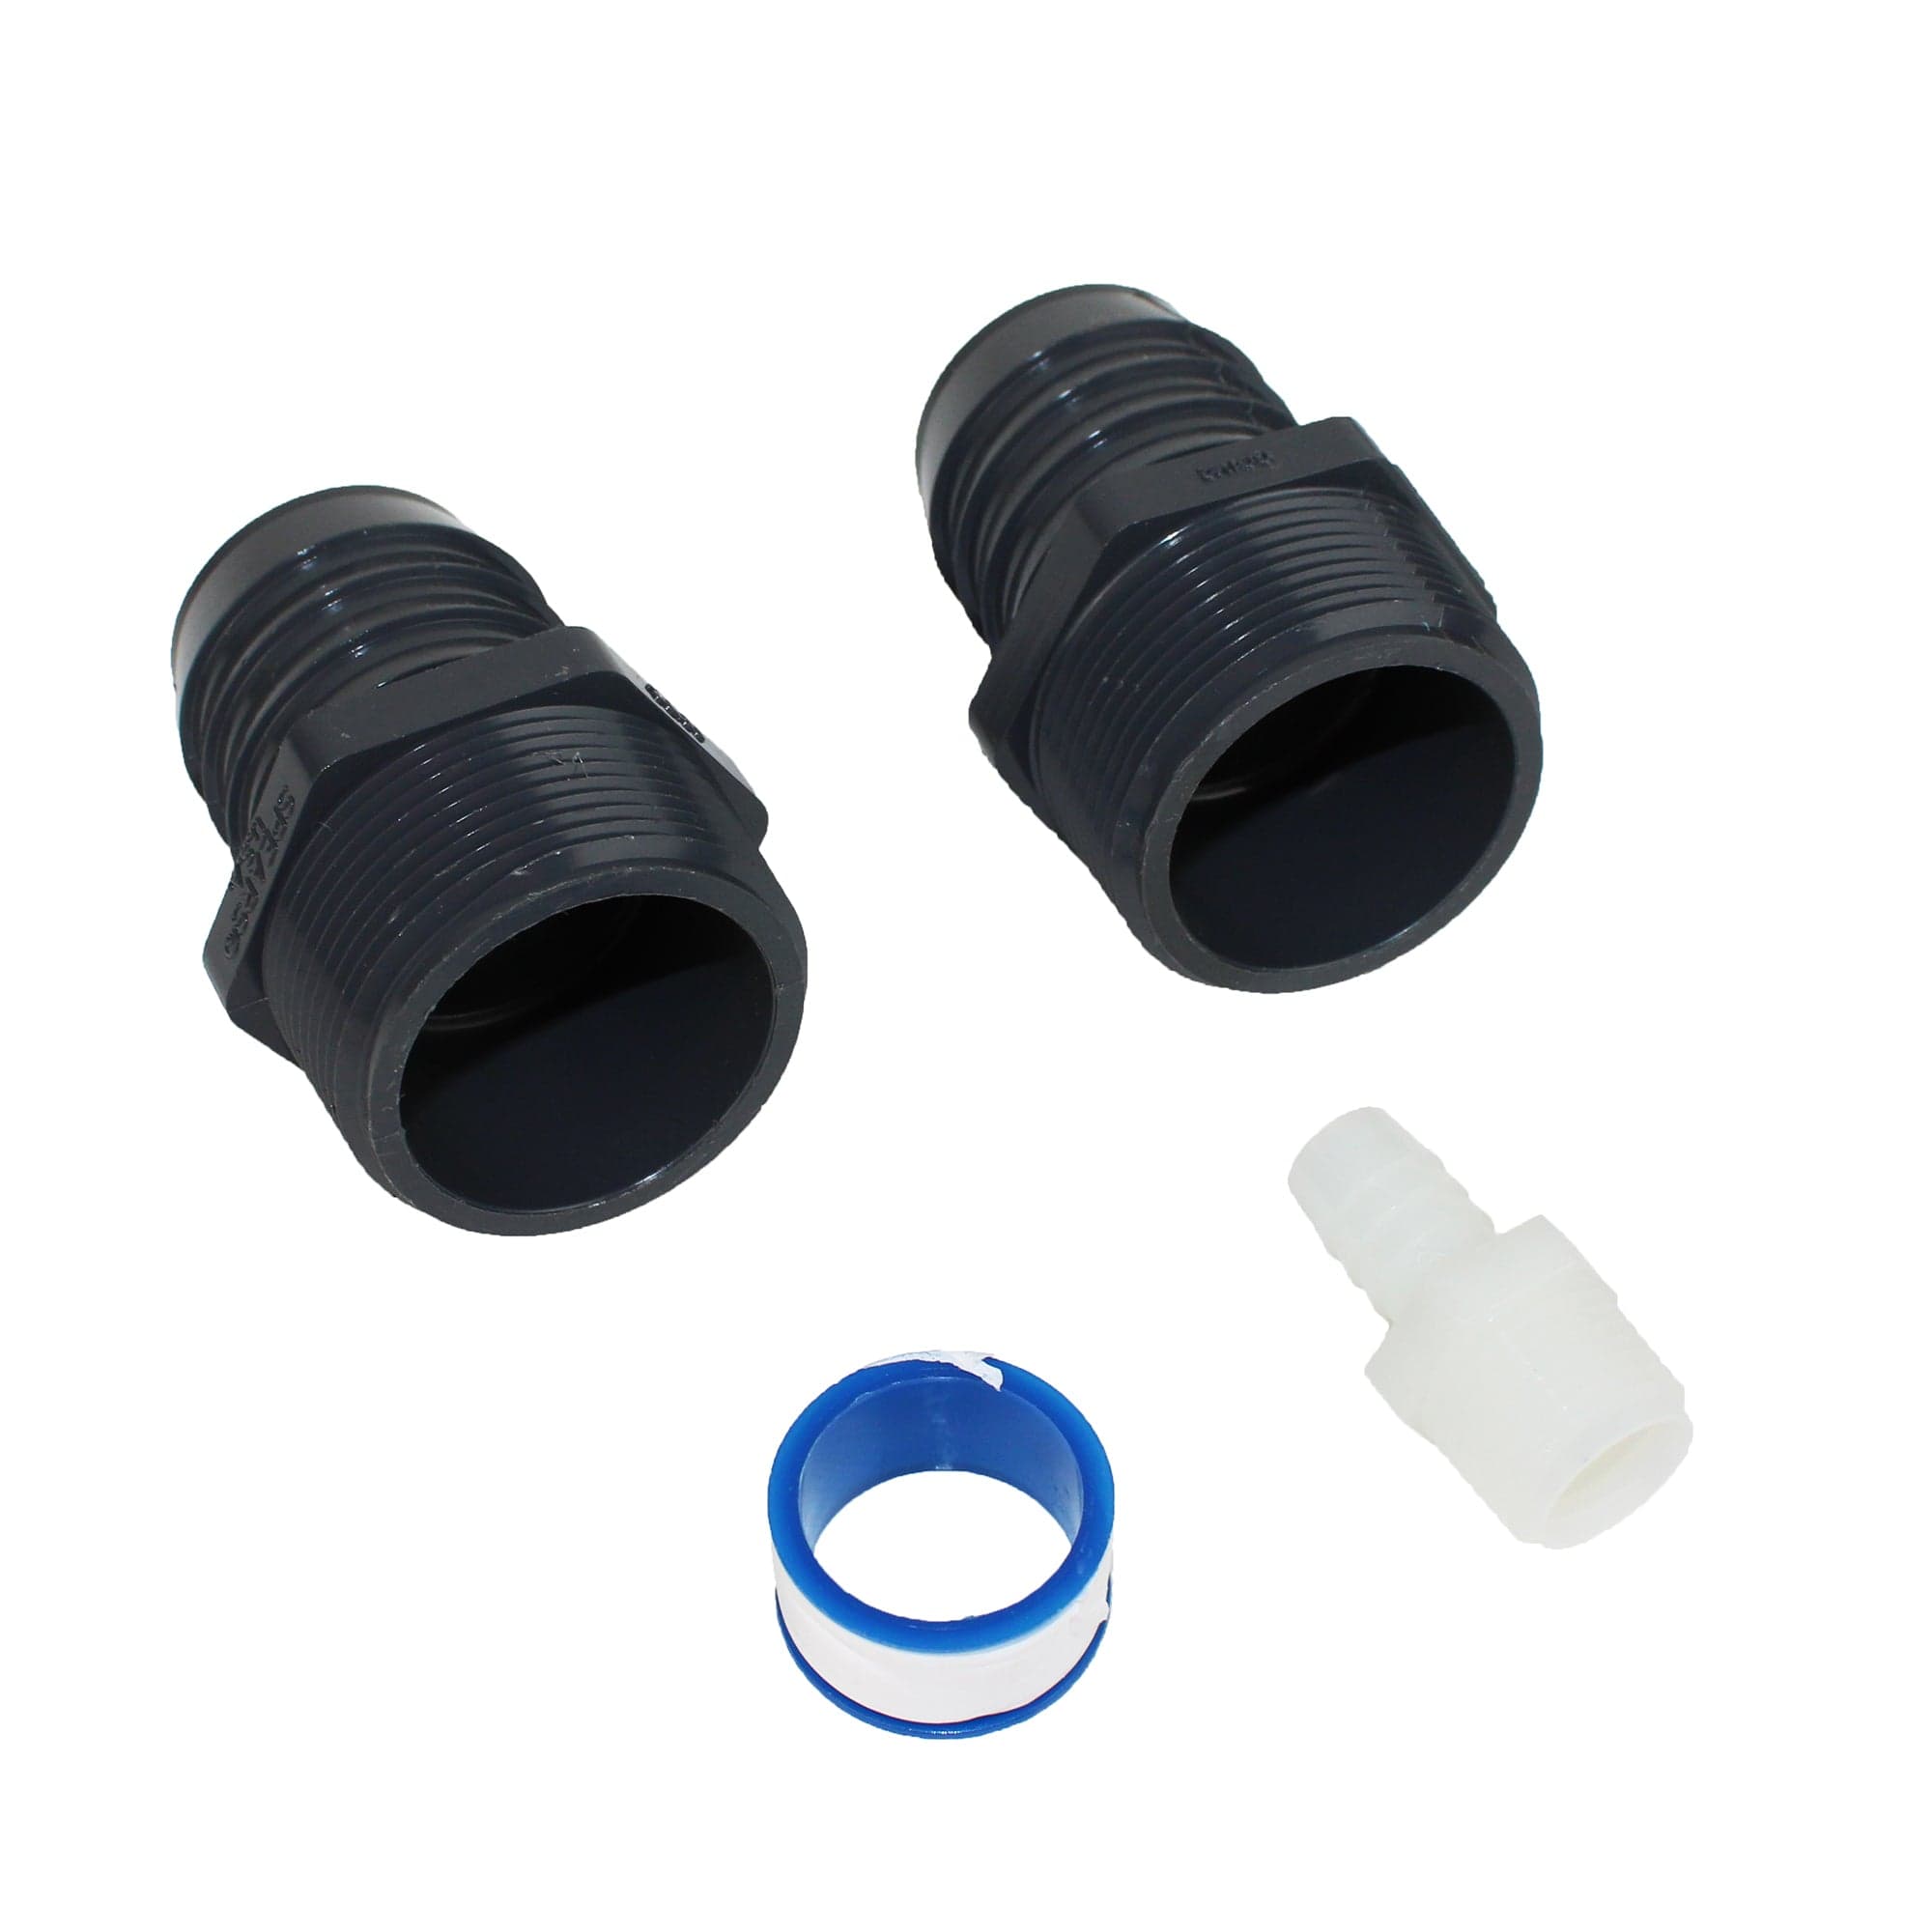 Todd Marine 93-2220 Holding Tank Straight Pipe to Hose Adapter Kit